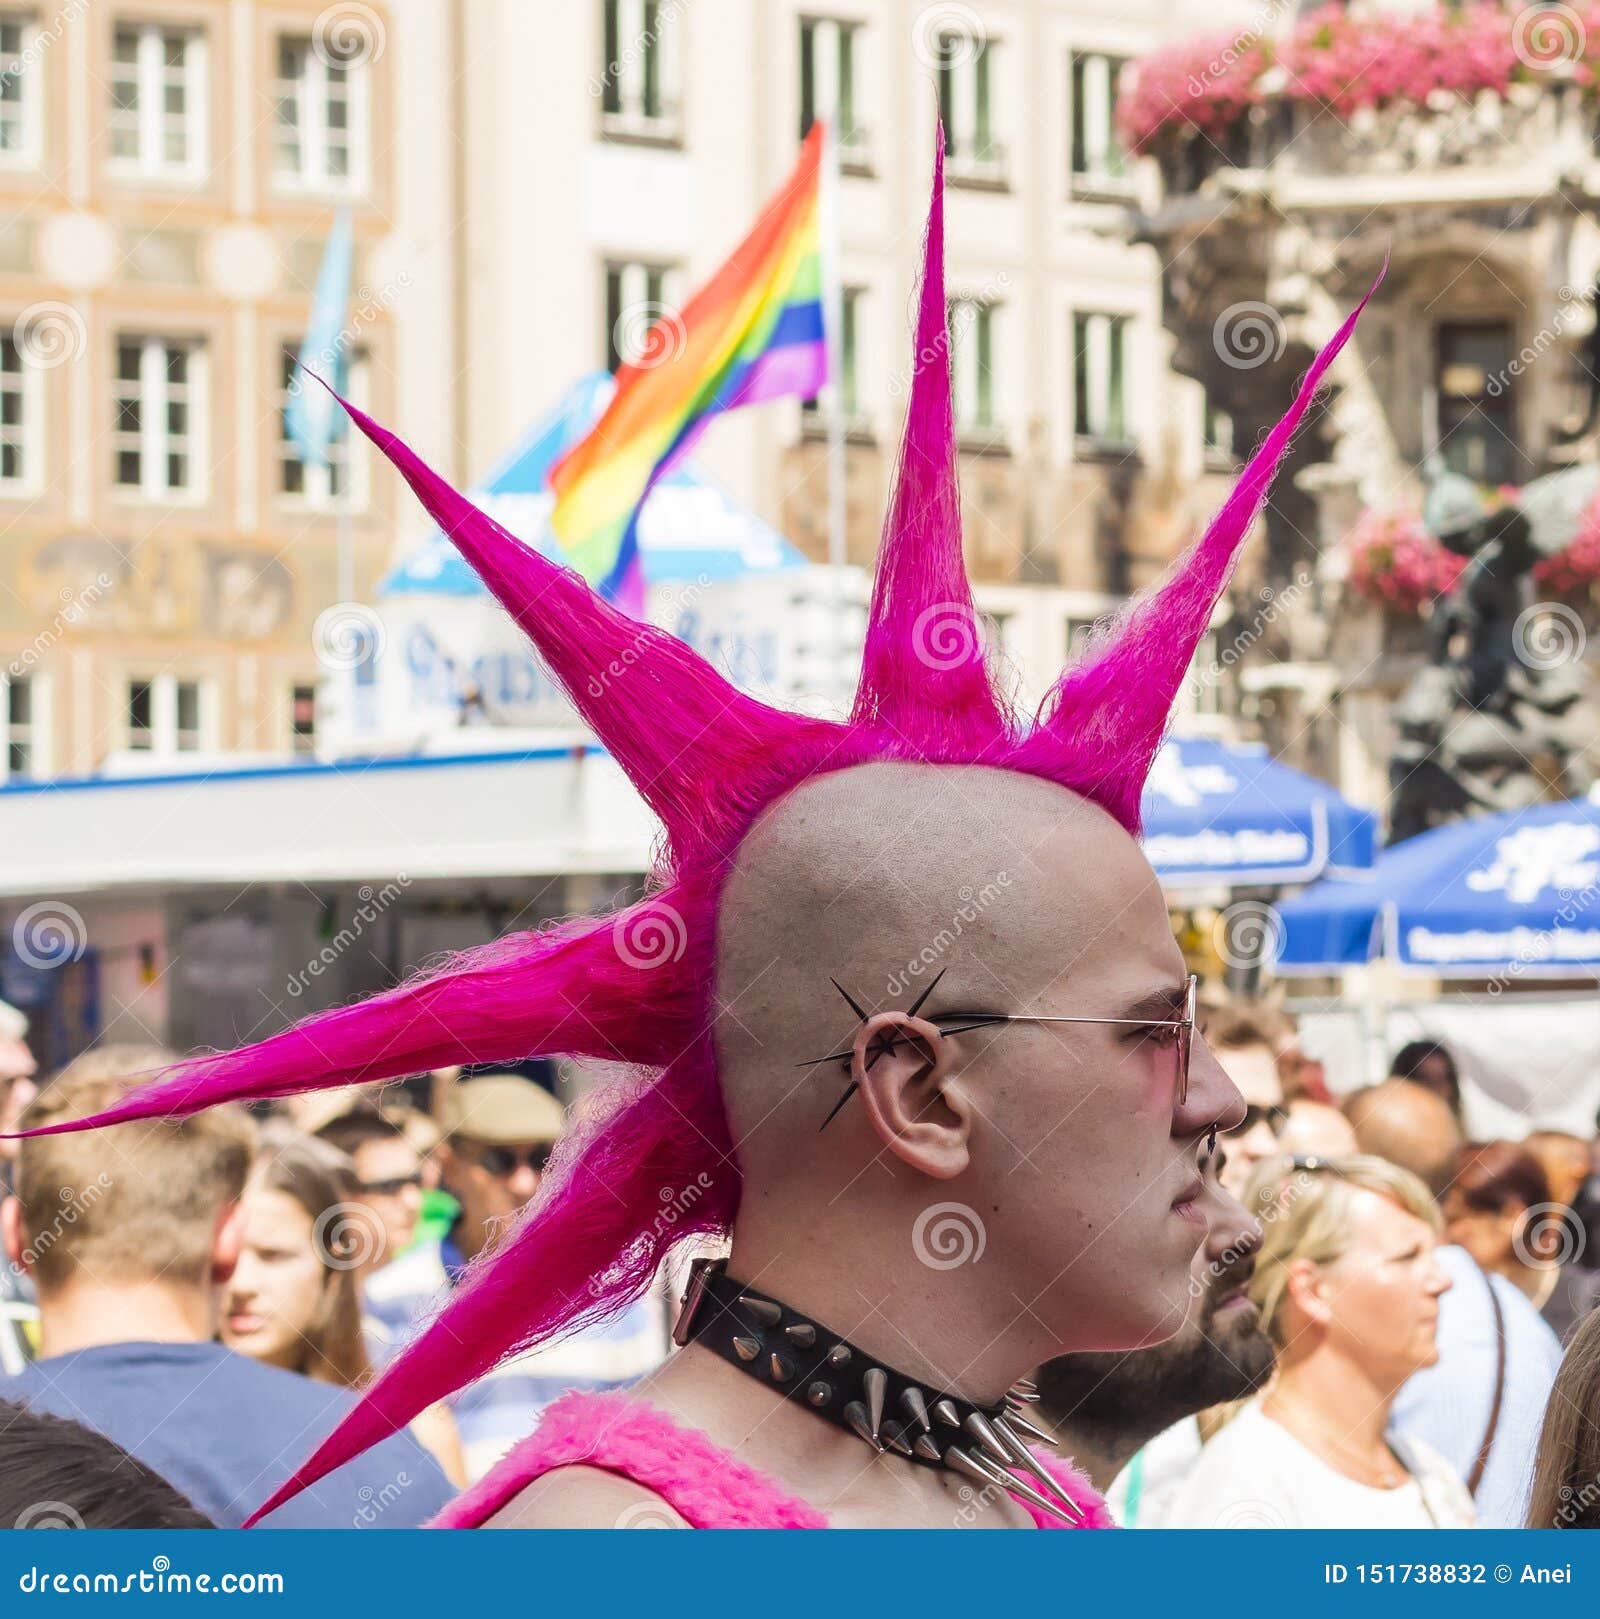 https://thumbs.dreamstime.com/z/punk-large-pink-mohawk-attending-gay-pride-parade-also-known-as-christopher-street-day-csd-munich-germany-punk-151738832.jpg